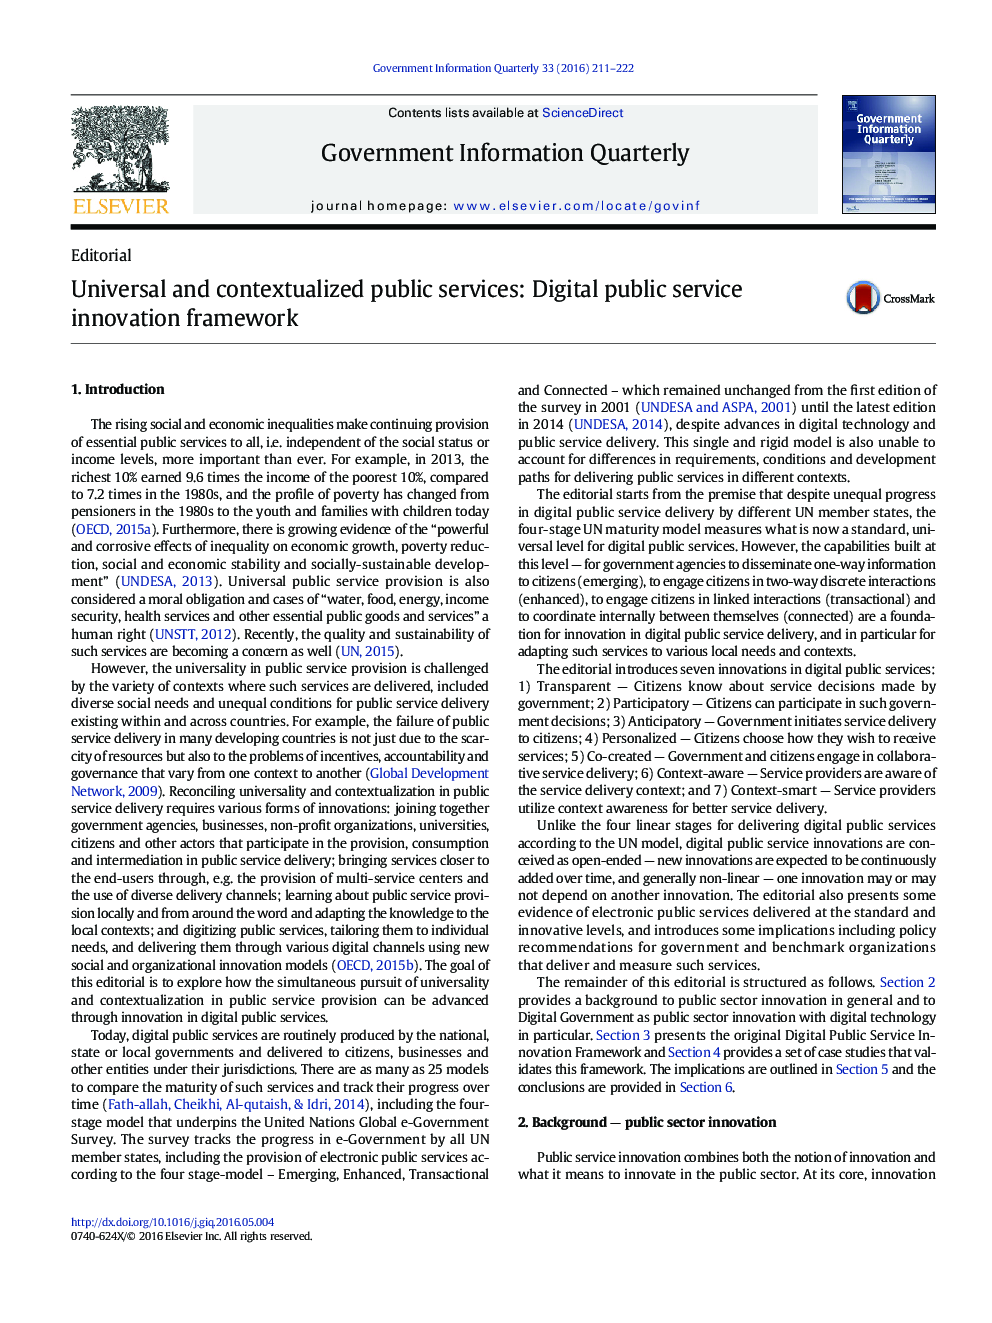 Universal and contextualized public services: Digital public service innovation framework